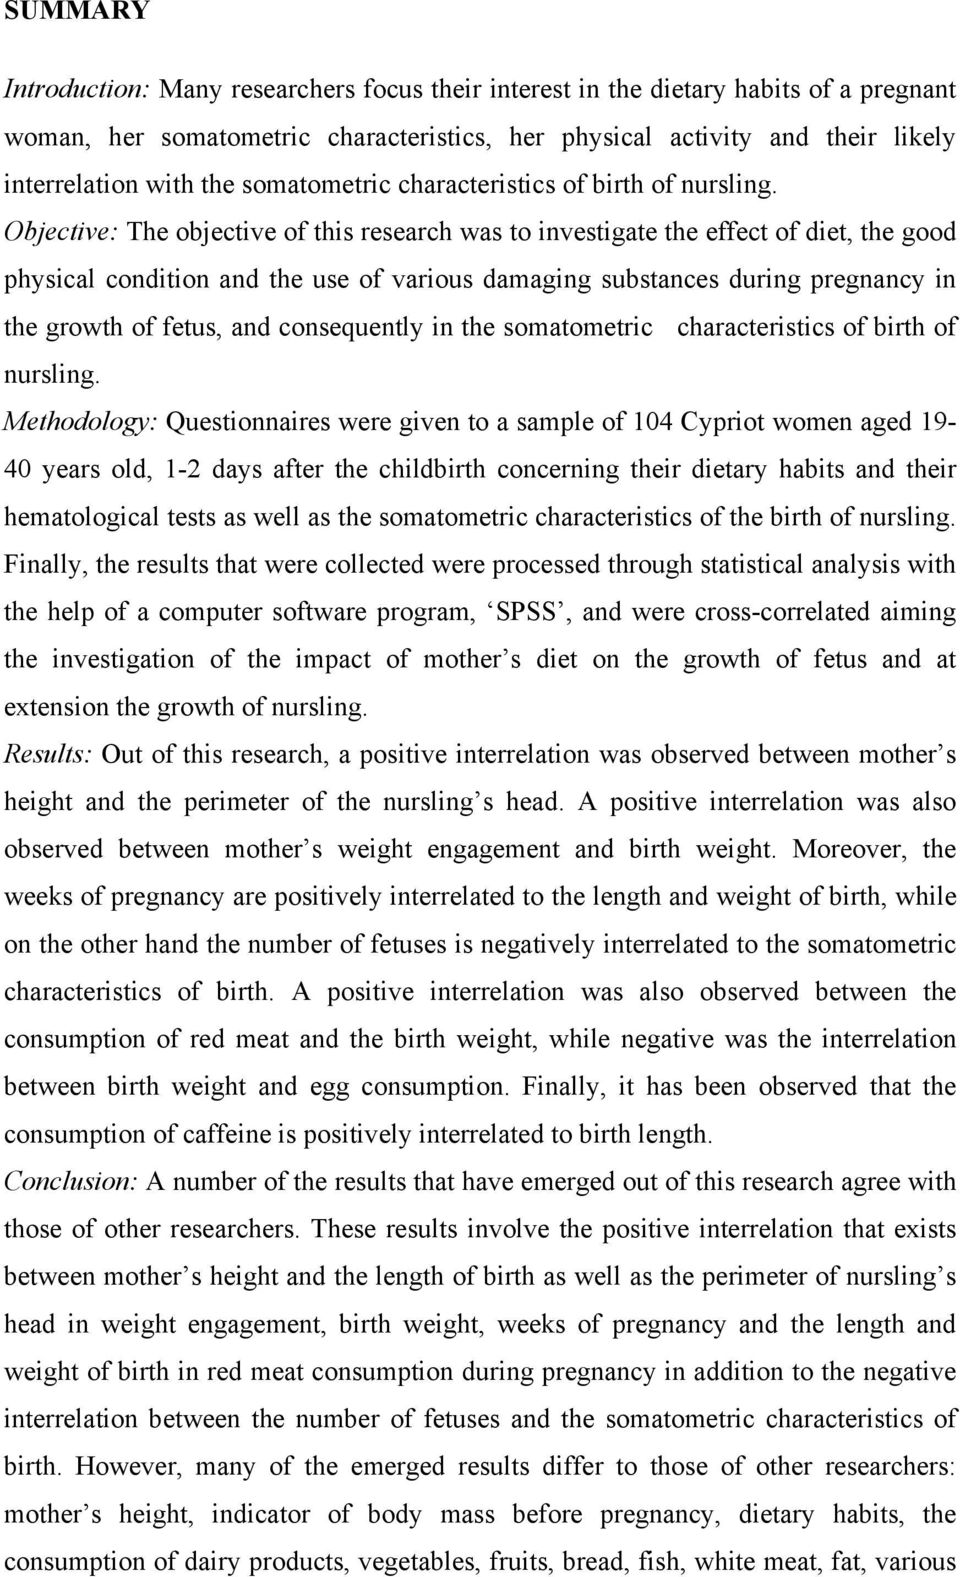 Objective: The objective of this research was to investigate the effect of diet, the good physical condition and the use of various damaging substances during pregnancy in the growth of fetus, and